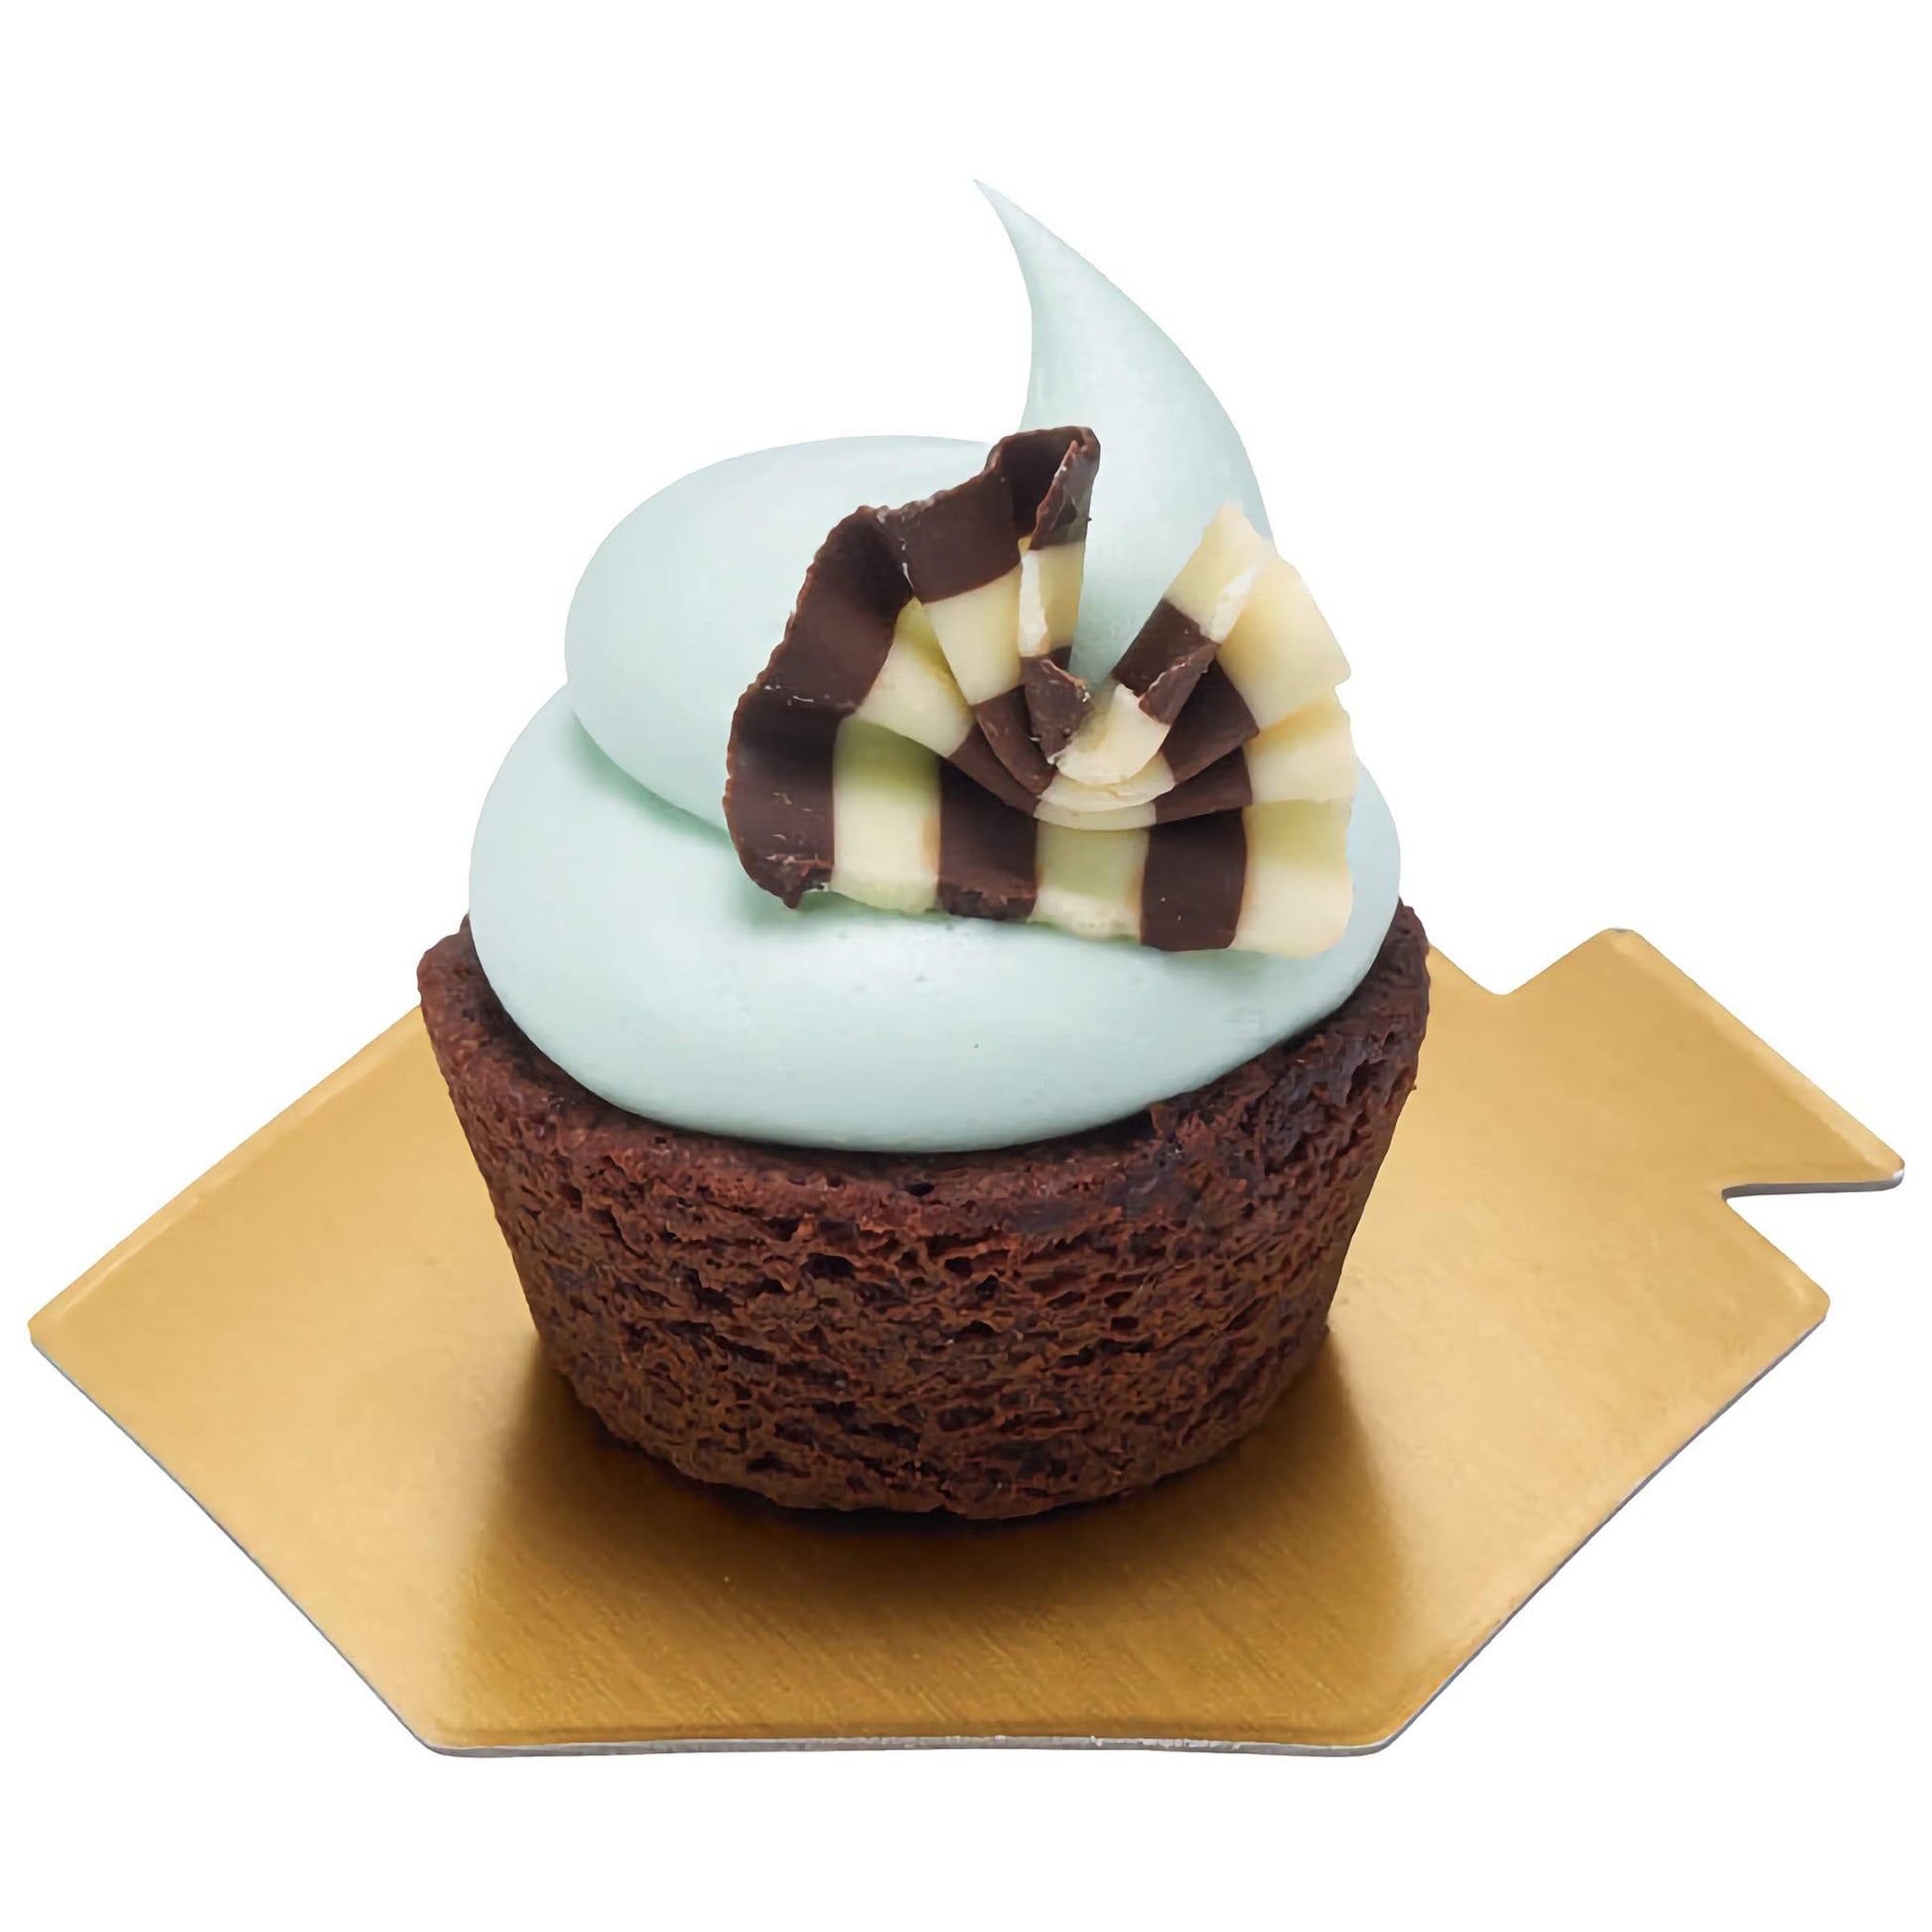 Stylish mini forest shavings of dark and white Belgian chocolate on a chocolate cupcake with smooth blue frosting, perfect for sophisticated bakery offerings.